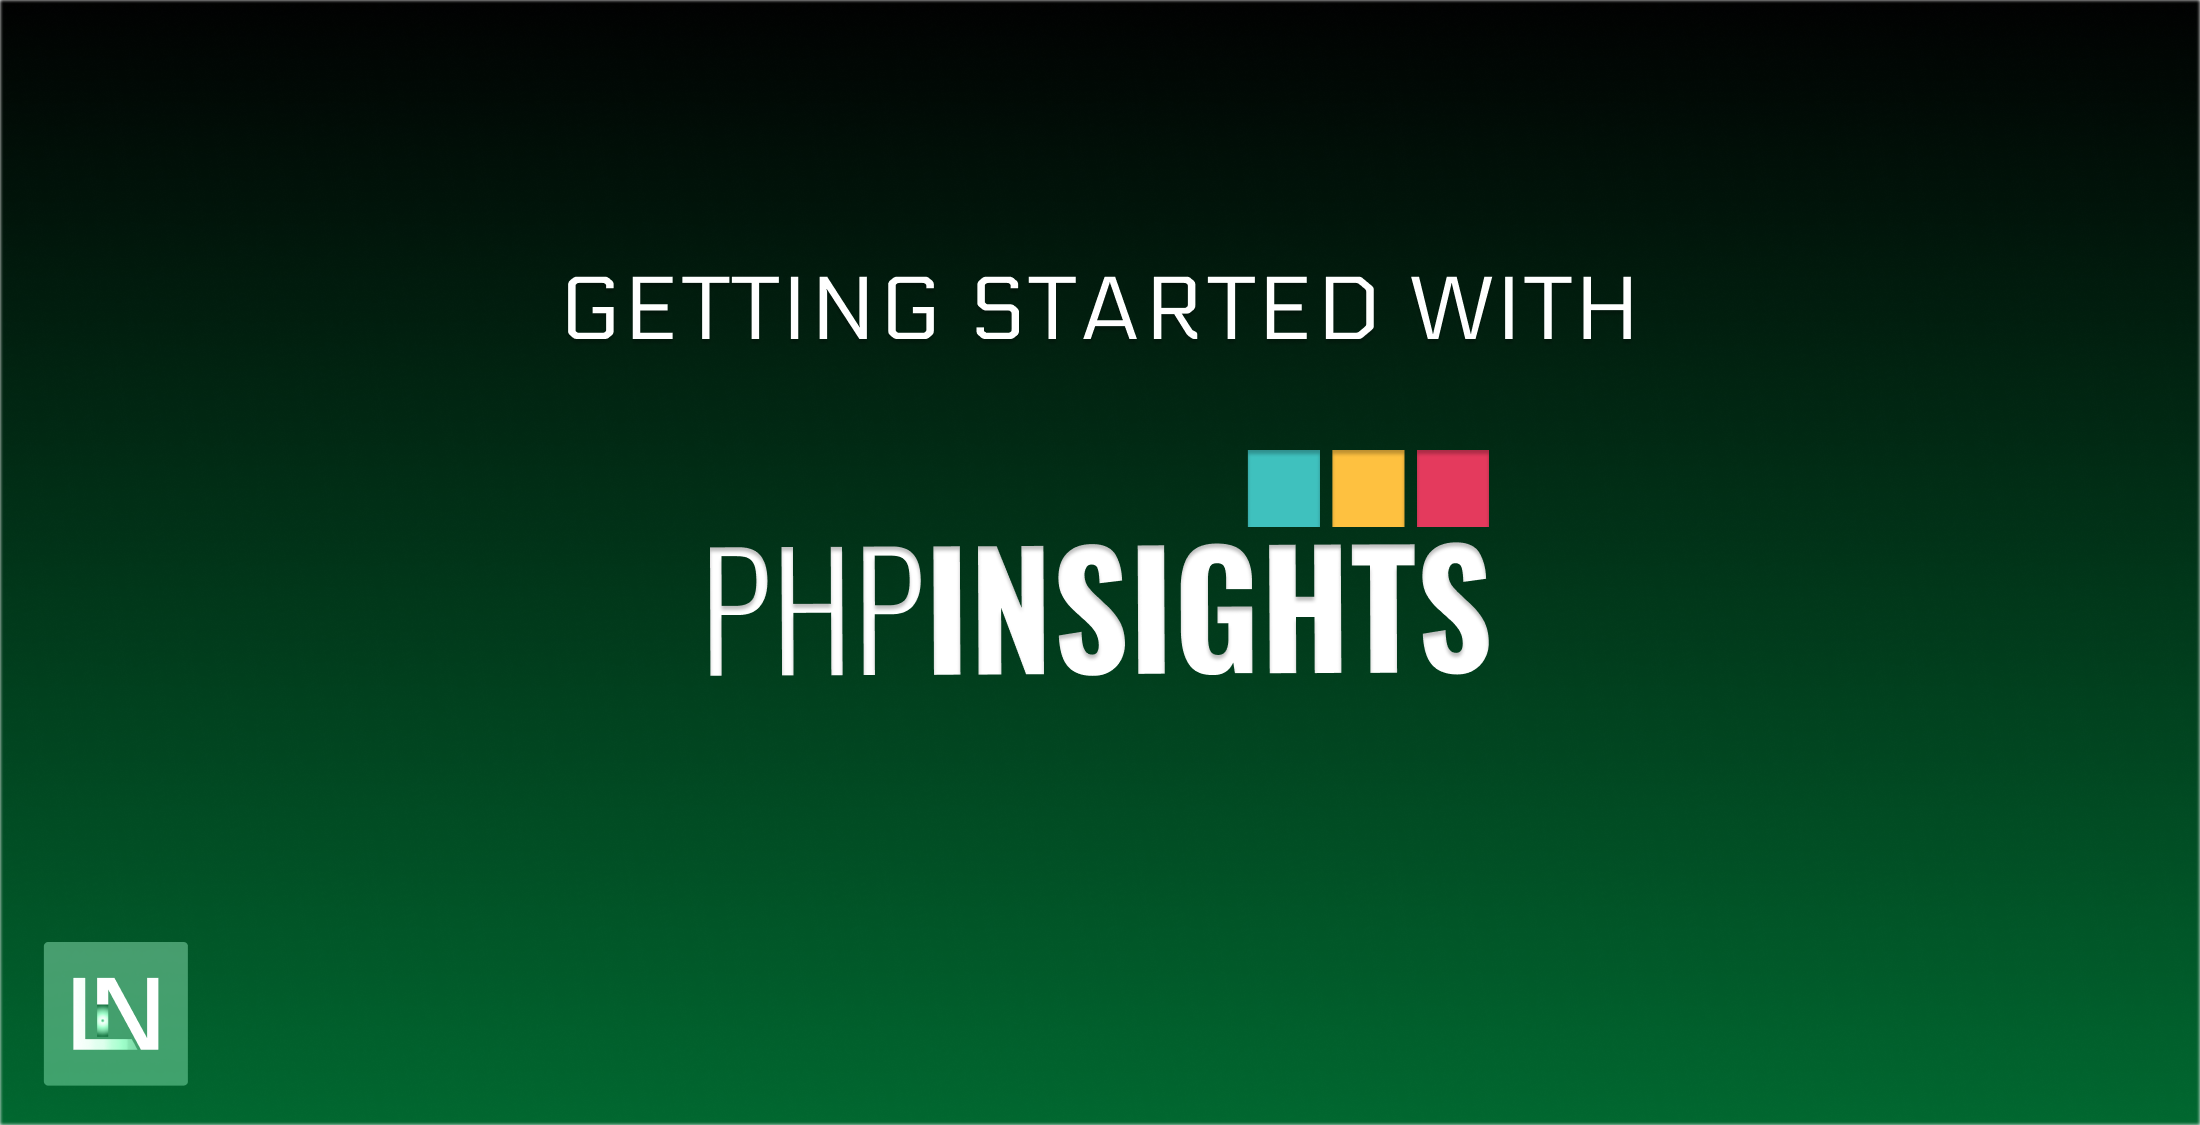 Getting started with PHPInsights image